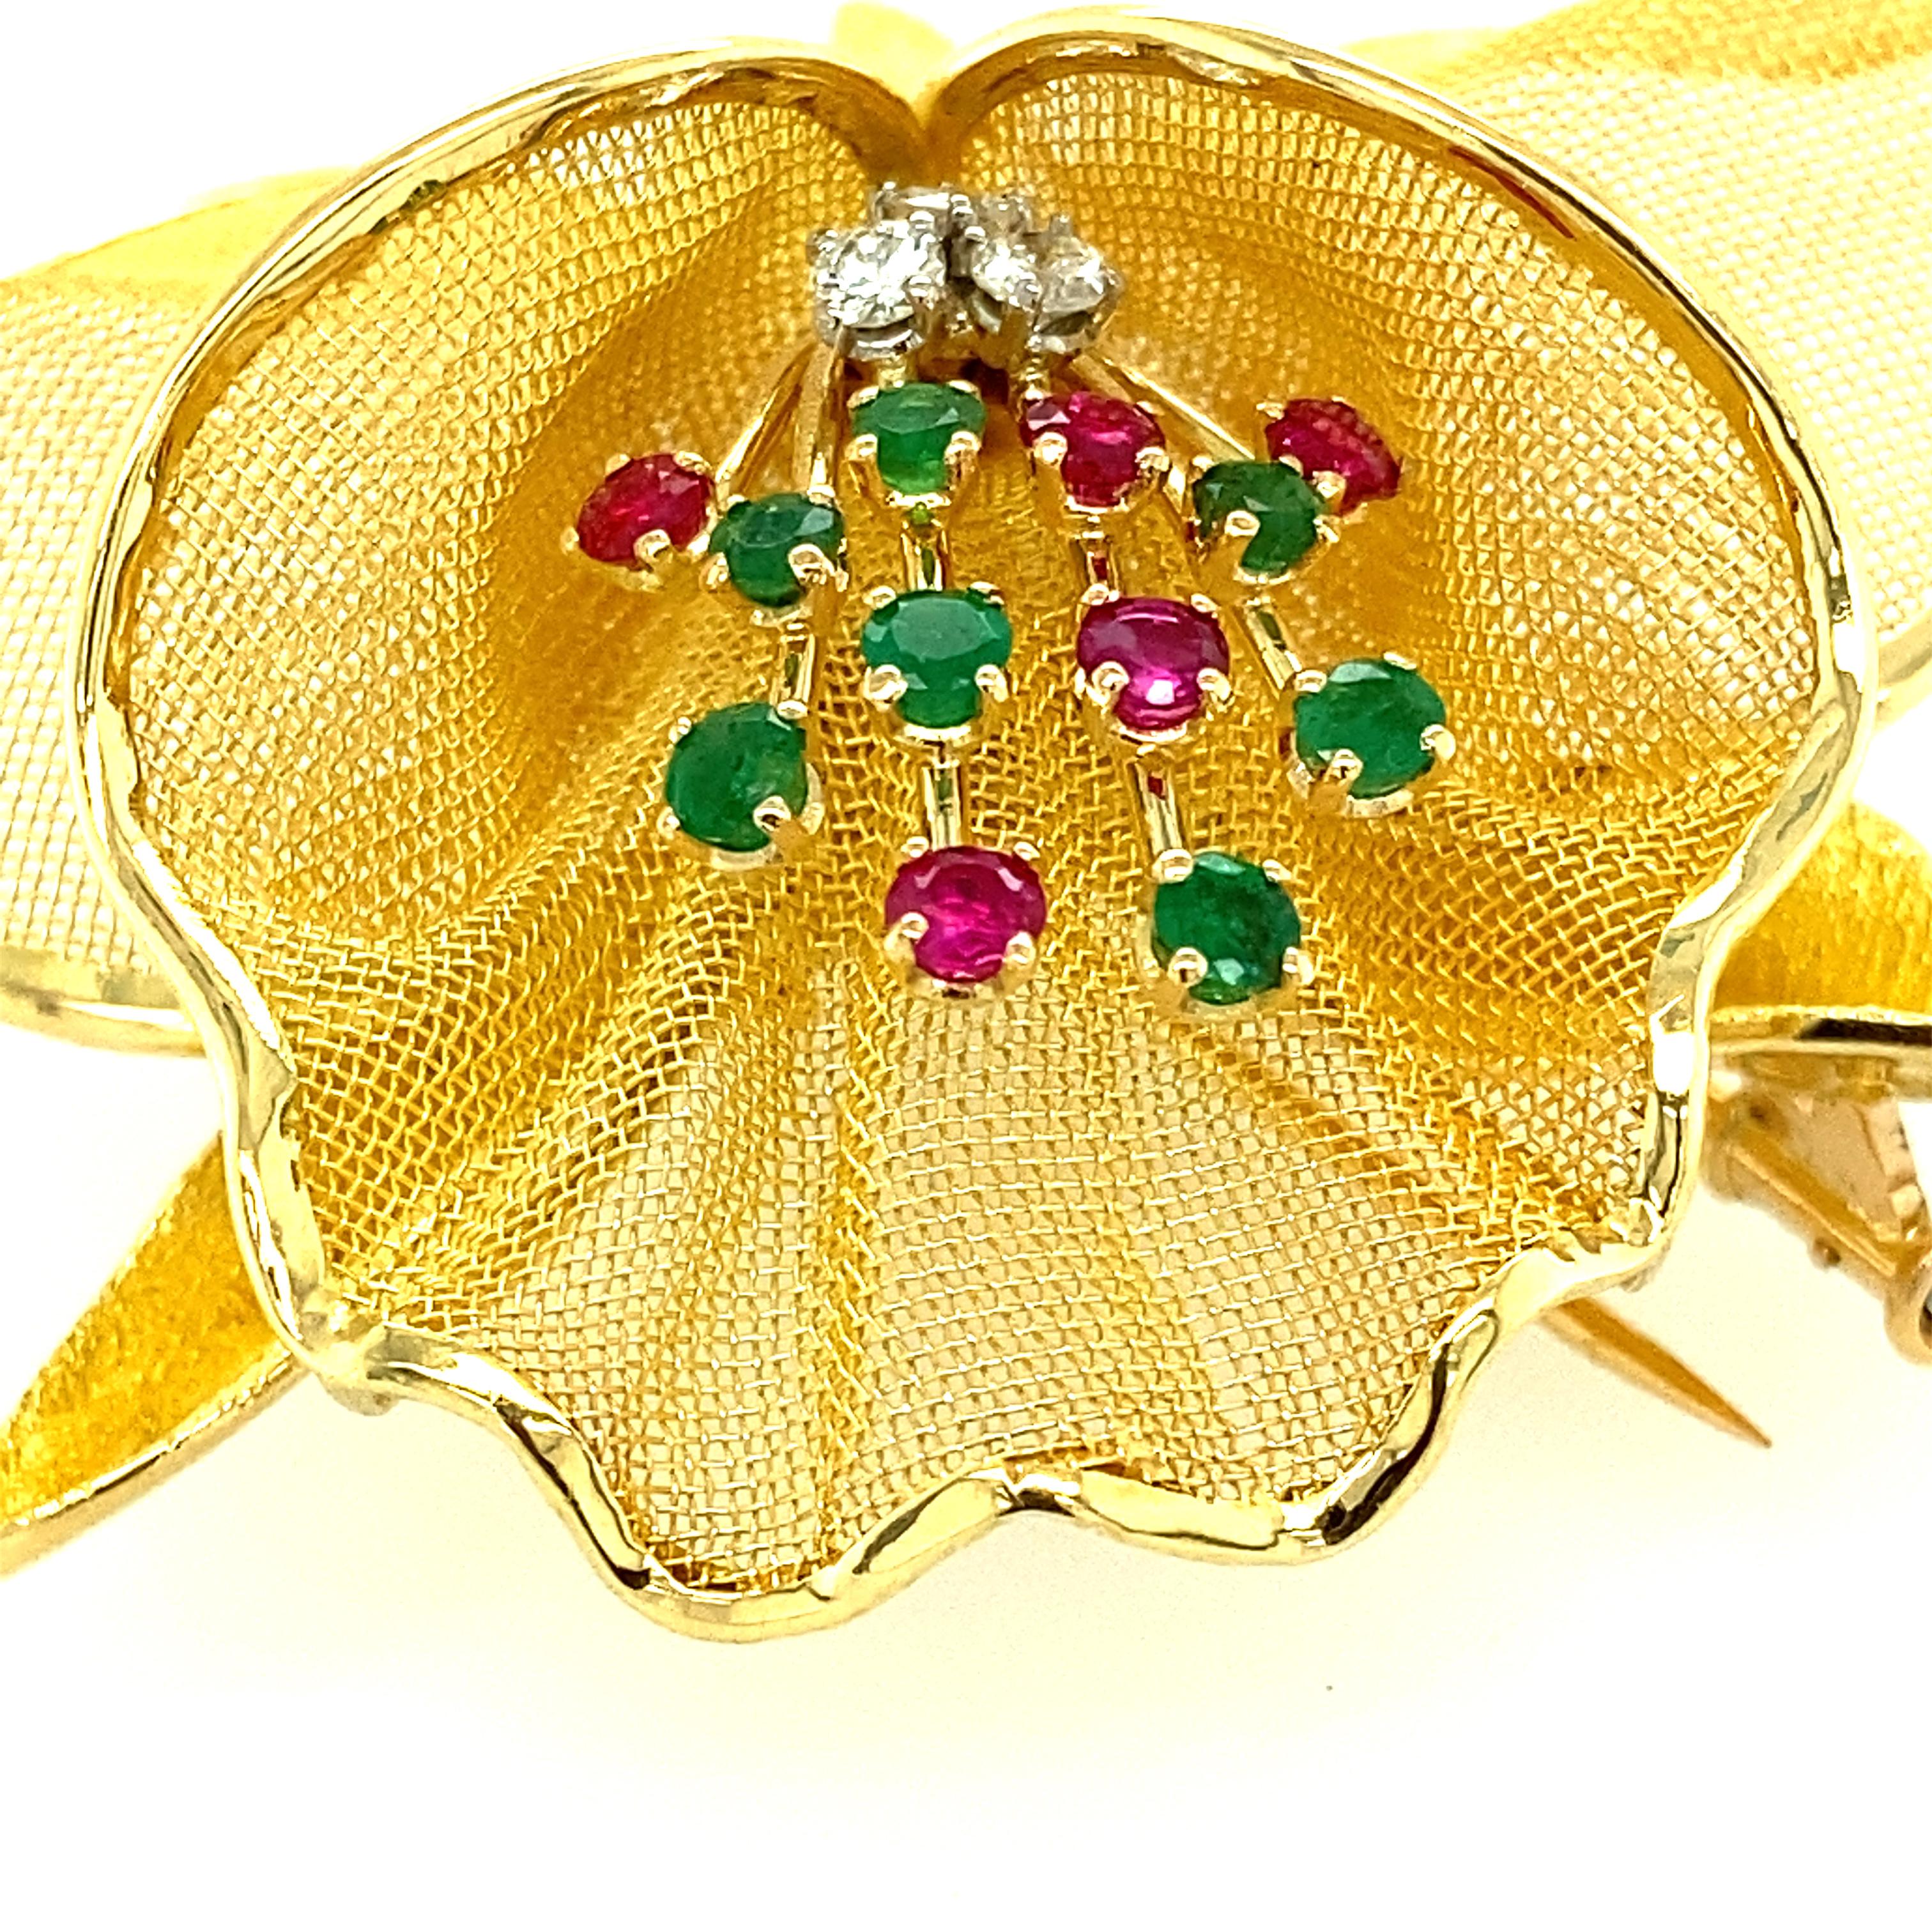 One 18 karat yellow gold (signed Merrin France 18K) orchid design pin set with seven 3mm round emeralds, five 3mm round rubies and three brilliant cut diamonds, approximately I/J color and SI clarity.  The pin measures 2.5 inches in diameter and is